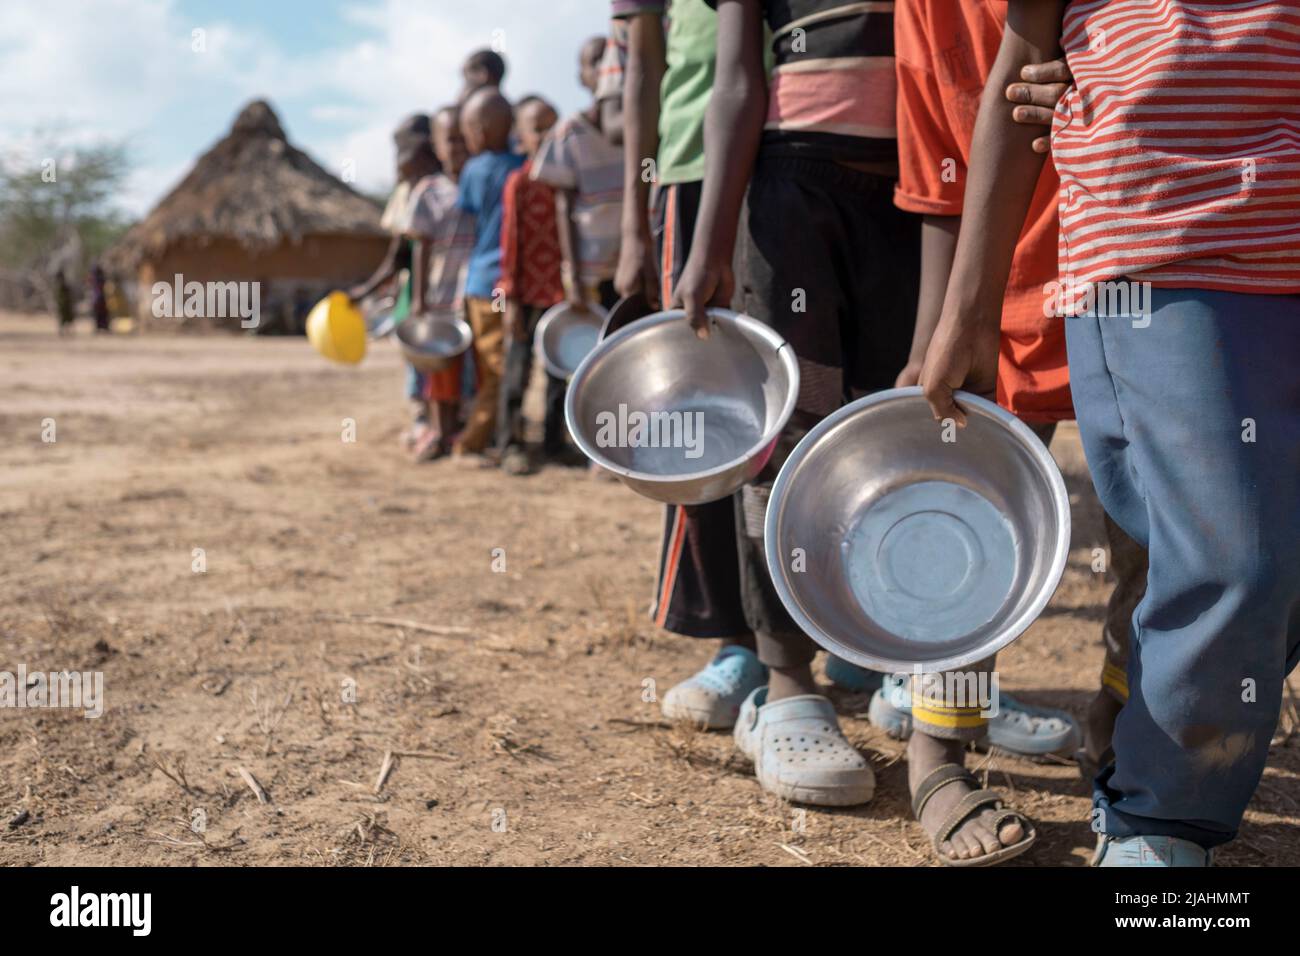 Food aid to needy and hungry people in Africa, social humanitarian aid, Ramadan month, iftar Stock Photo